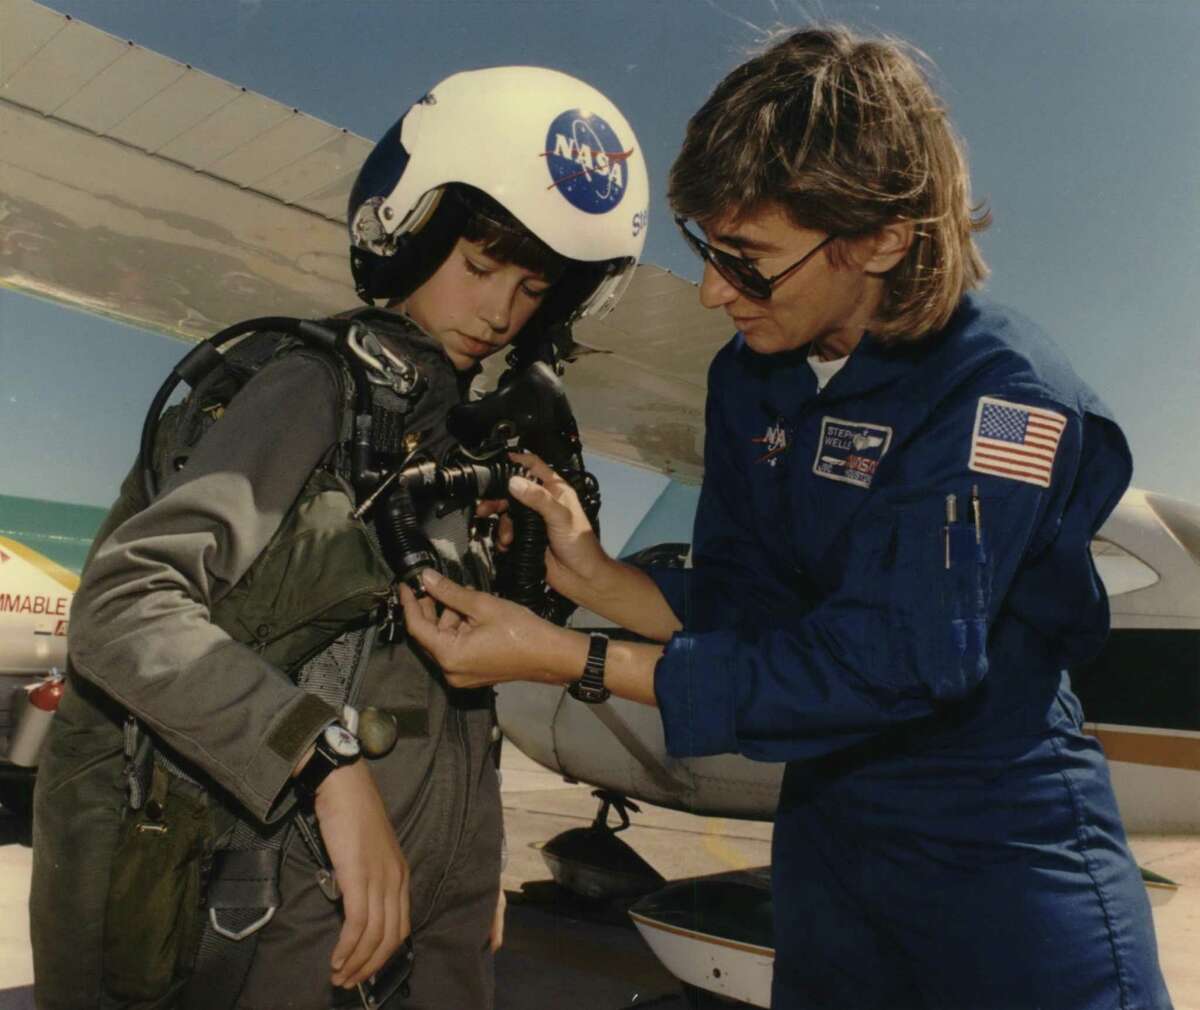 In this 1993 photo from the Houston Post archives, eleven-year-old Victoria Van Meter had one more milestone to complete after finishing her record-setting flight across the country on Sept. 23, 1993. Flying her plane to Houston's Ellington Field she was greeted by NASA pilot Stephanie Wells (R), who let her try on her flight helmet and parachute before touring Johnson Space Center. Van Meter dreamed of becoming an astronaut when she grew up. She died in 2008 at age 26.